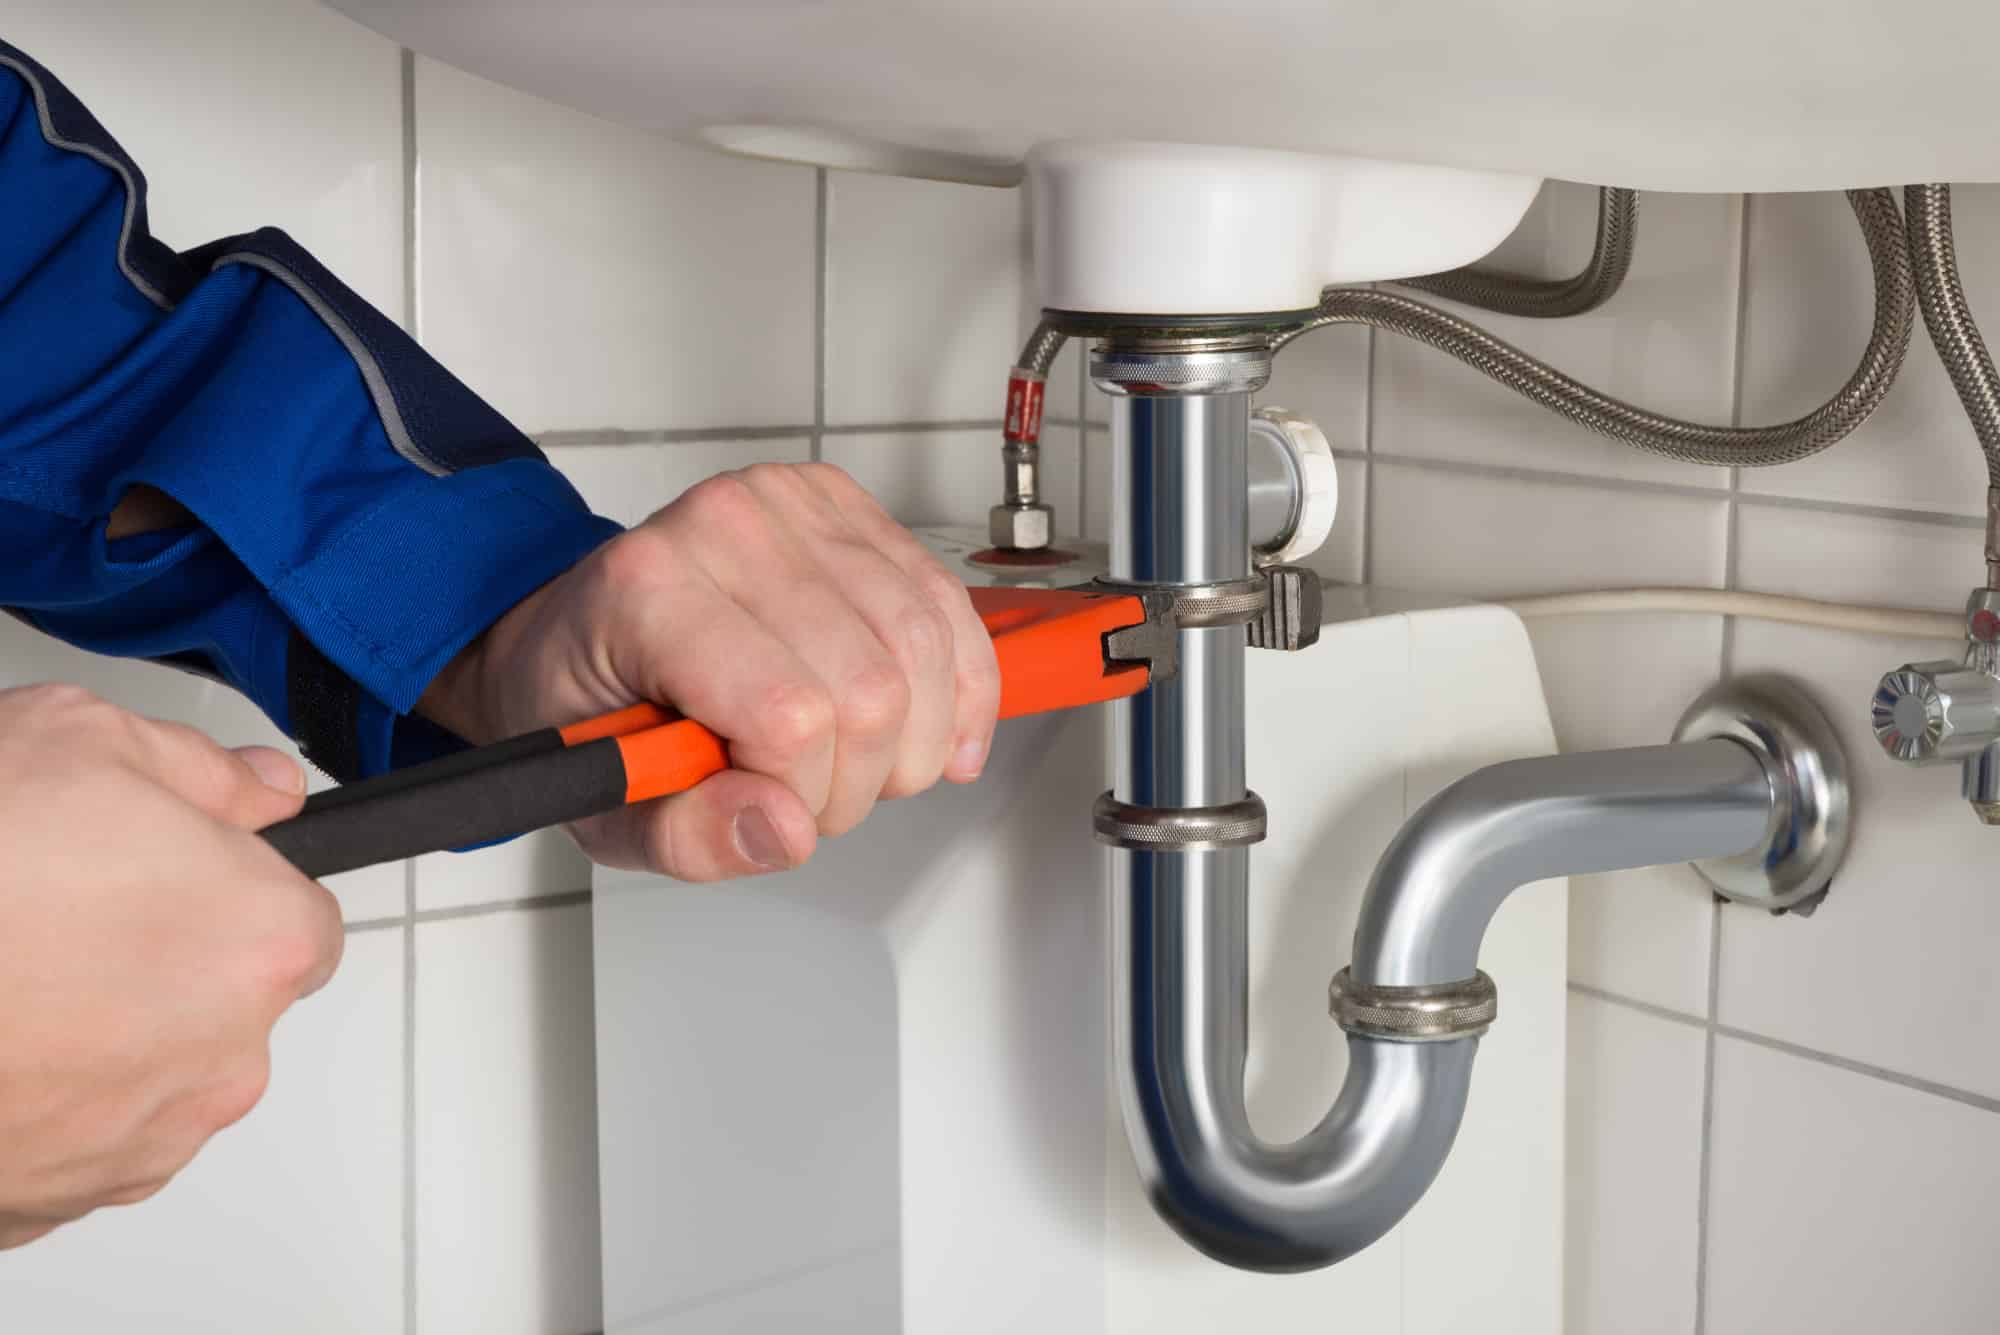 5 Things to Do if a Pipe Is Leaking in Your Home